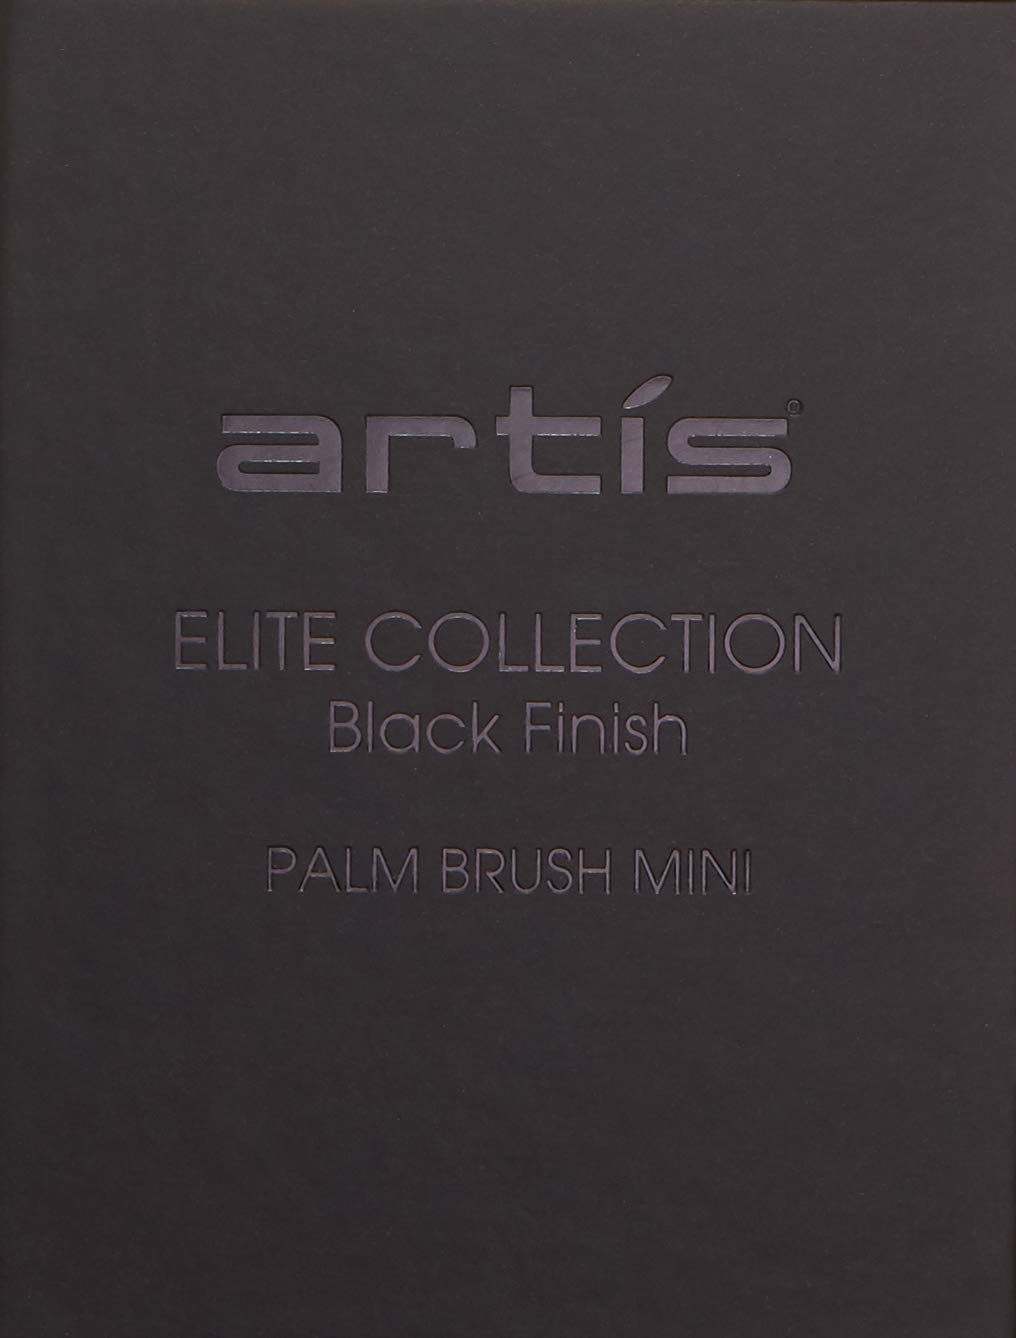 Artis Elite Palm Makeup Brush Luxury Synthetic Cosmefibre Brush Ideal For Foundation, SPF, Skincare Use With Liquids, Powders, and Creams Creates A Streak-Free Application